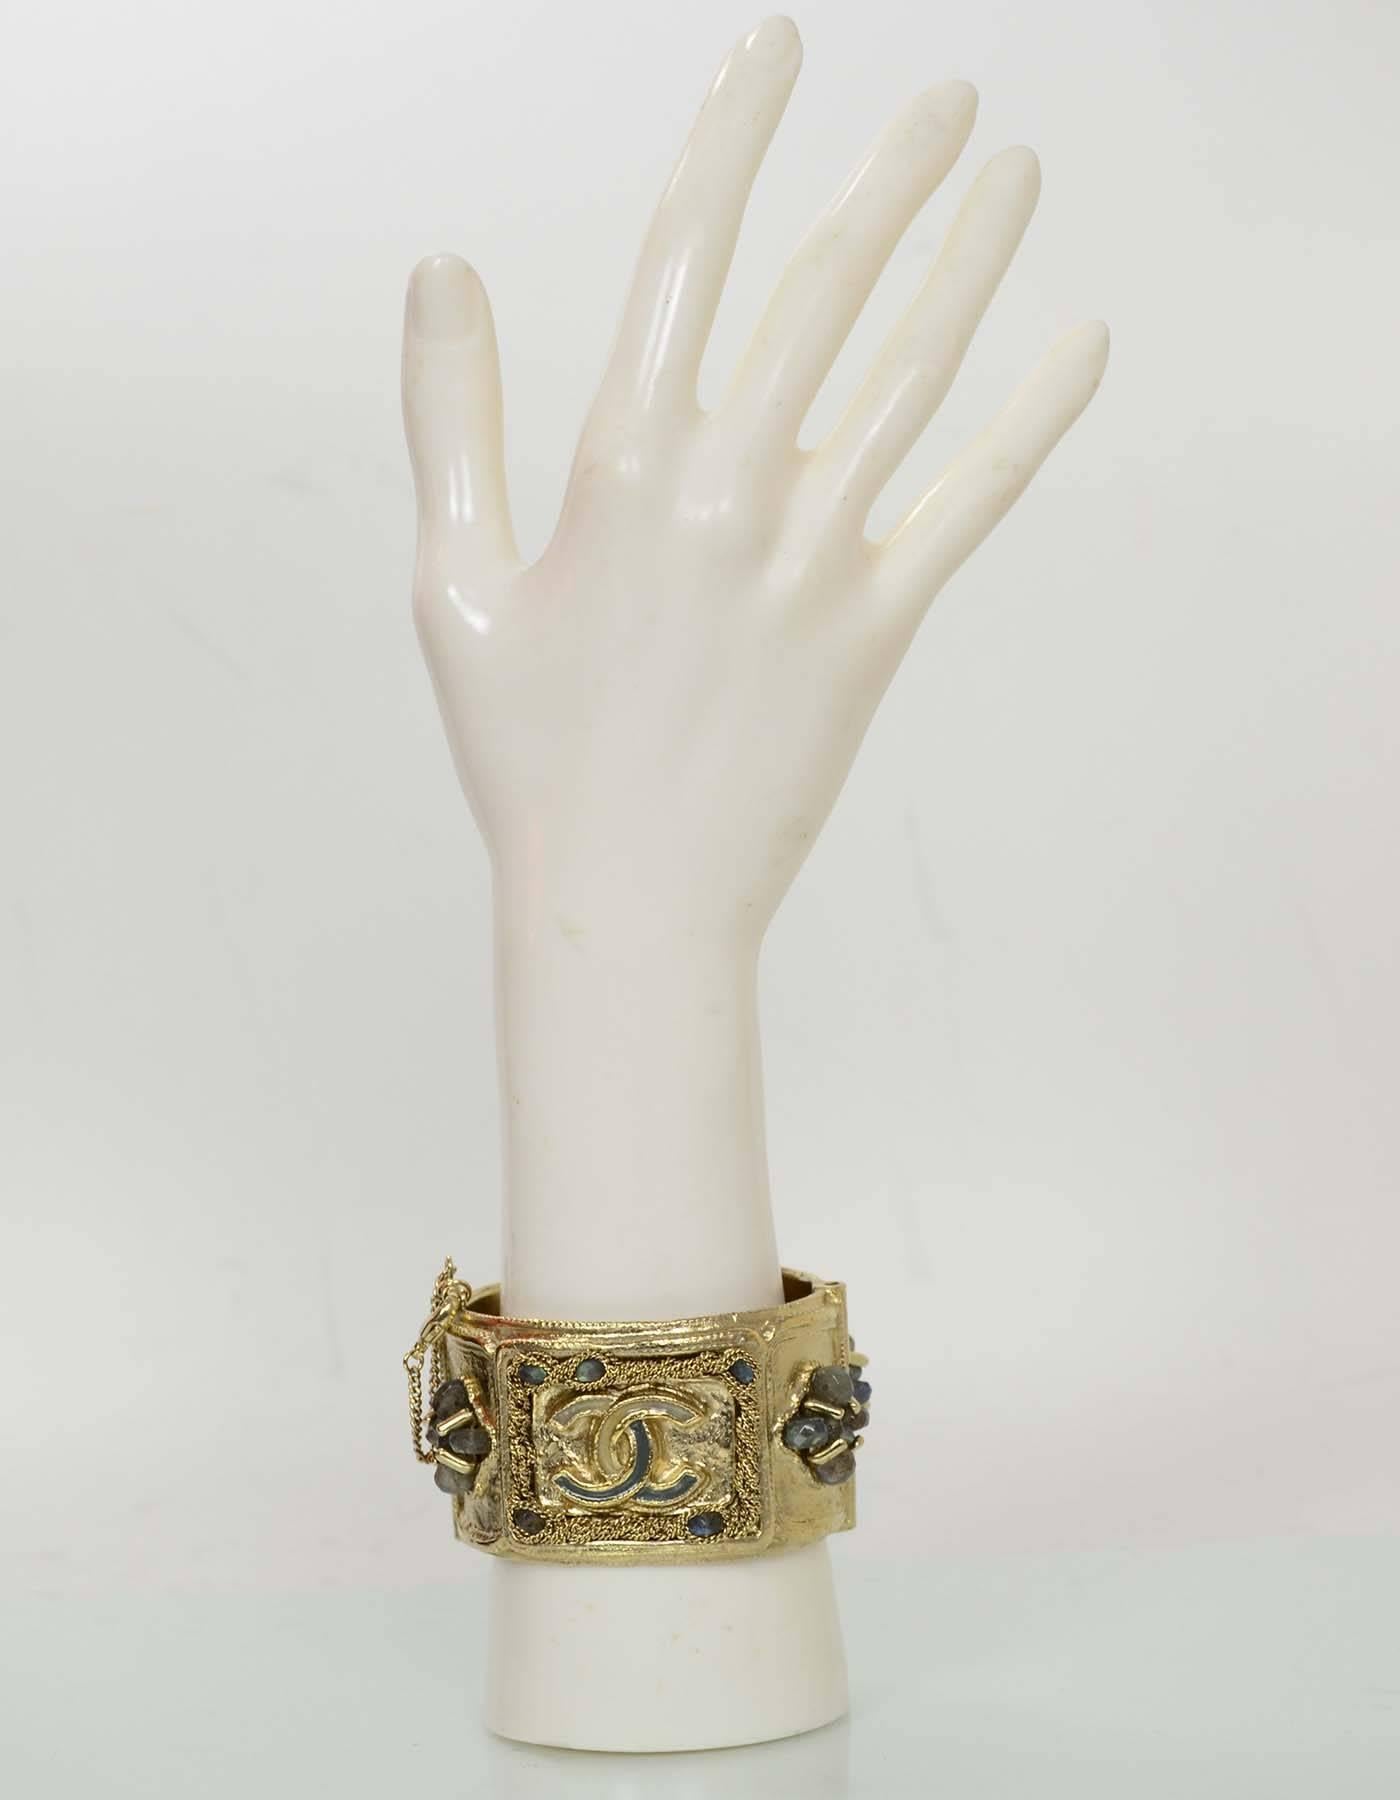 Chanel Goldtone and Jeweled CC Cuff

Made In: France
Year Of Production: 2012
Materials: Metal, stones
Closure/Opening: Pin closure
Stamp: Chanel A12 CC A Made in France
Overall Condition: Excellent pre-owned condition
Includes: Chanel pouch